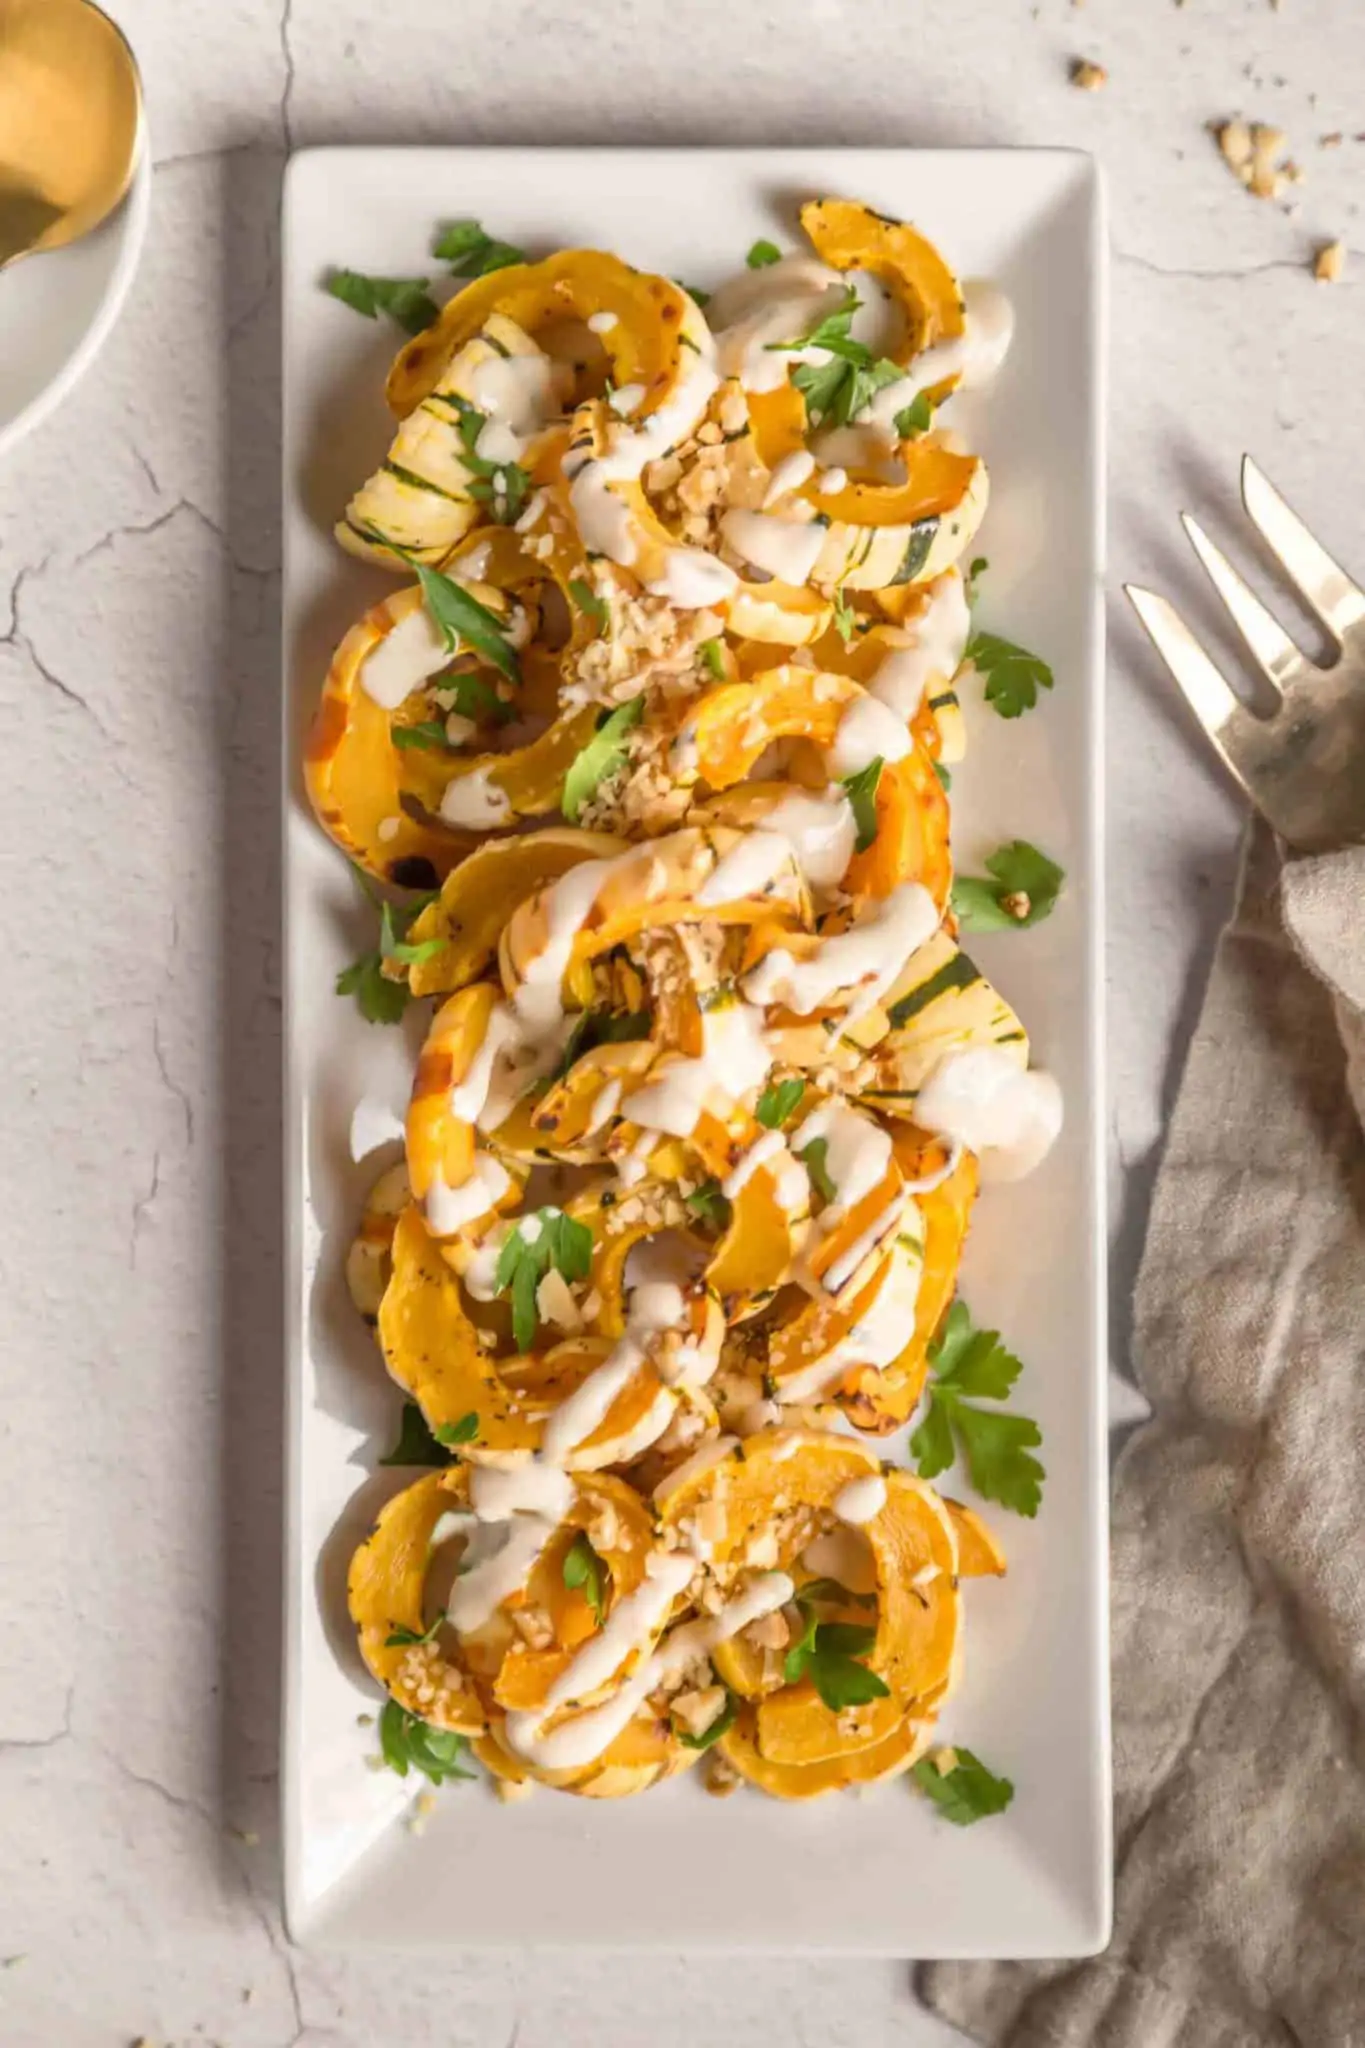 Roasted Delicata Squash garnished on a plate.